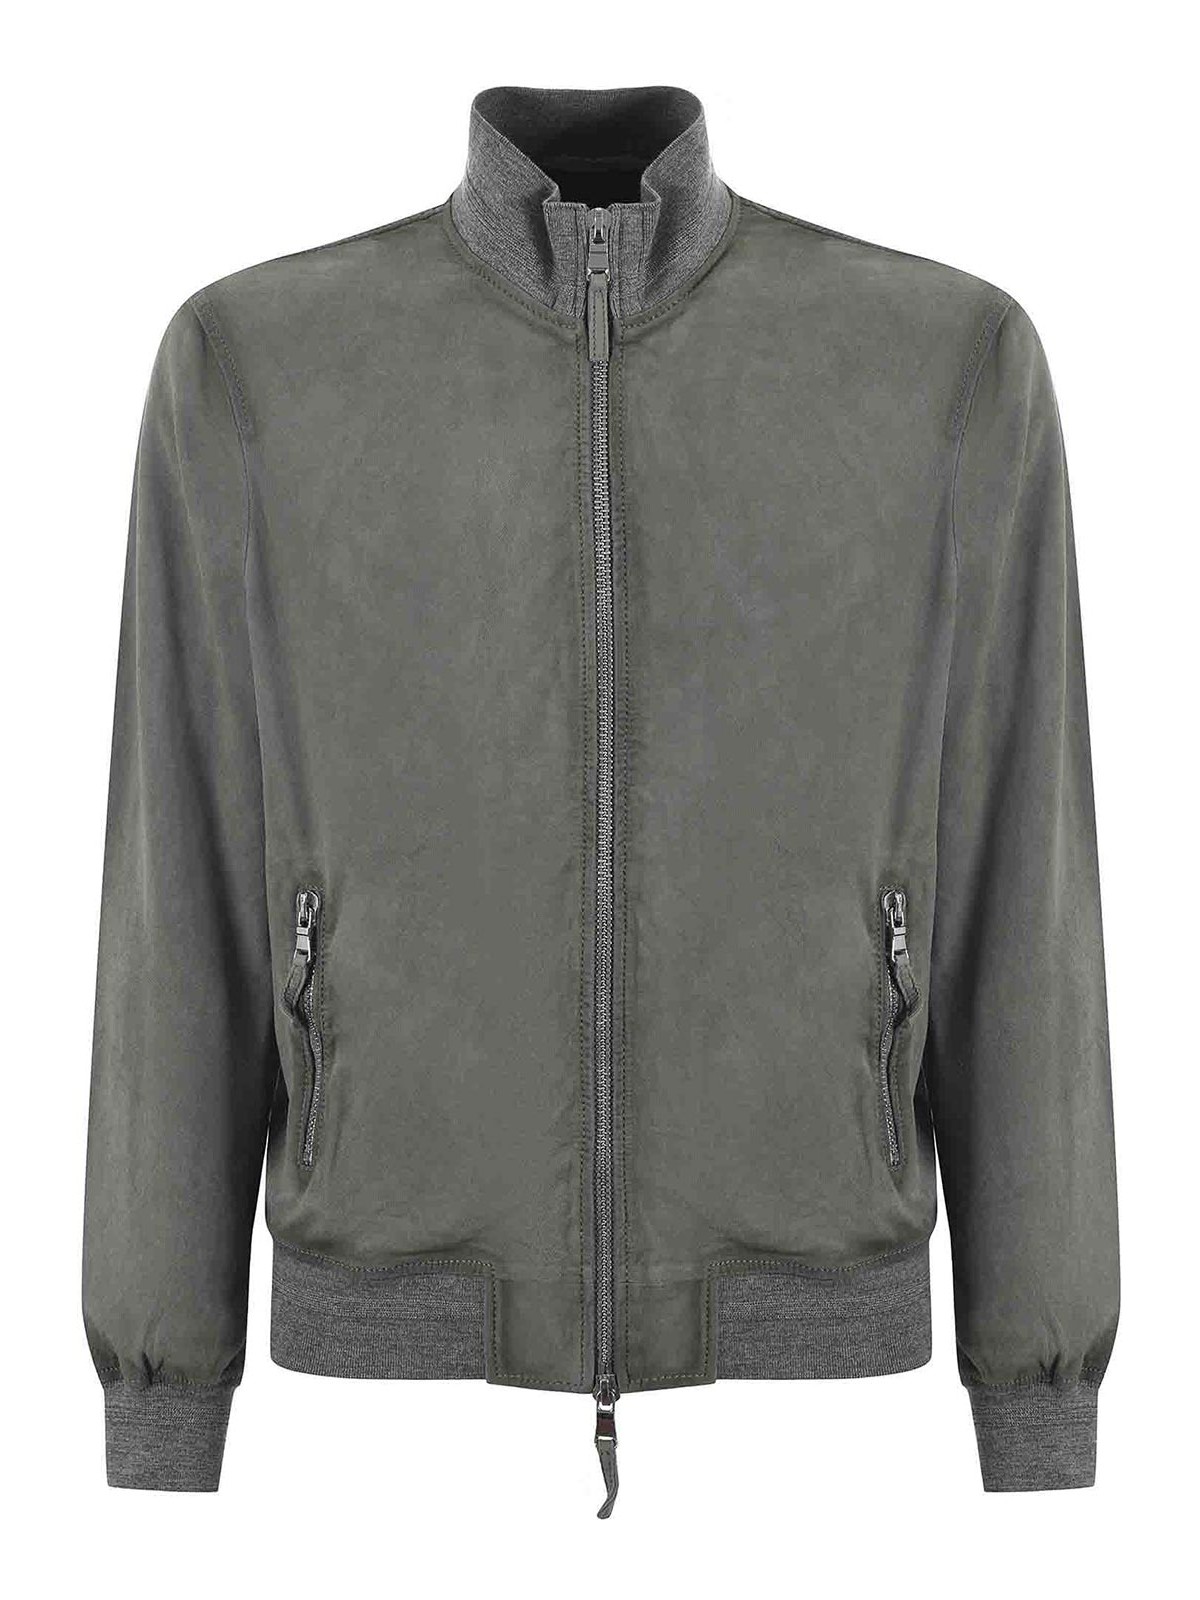 Shop The Jack Leathers Jacket In Green